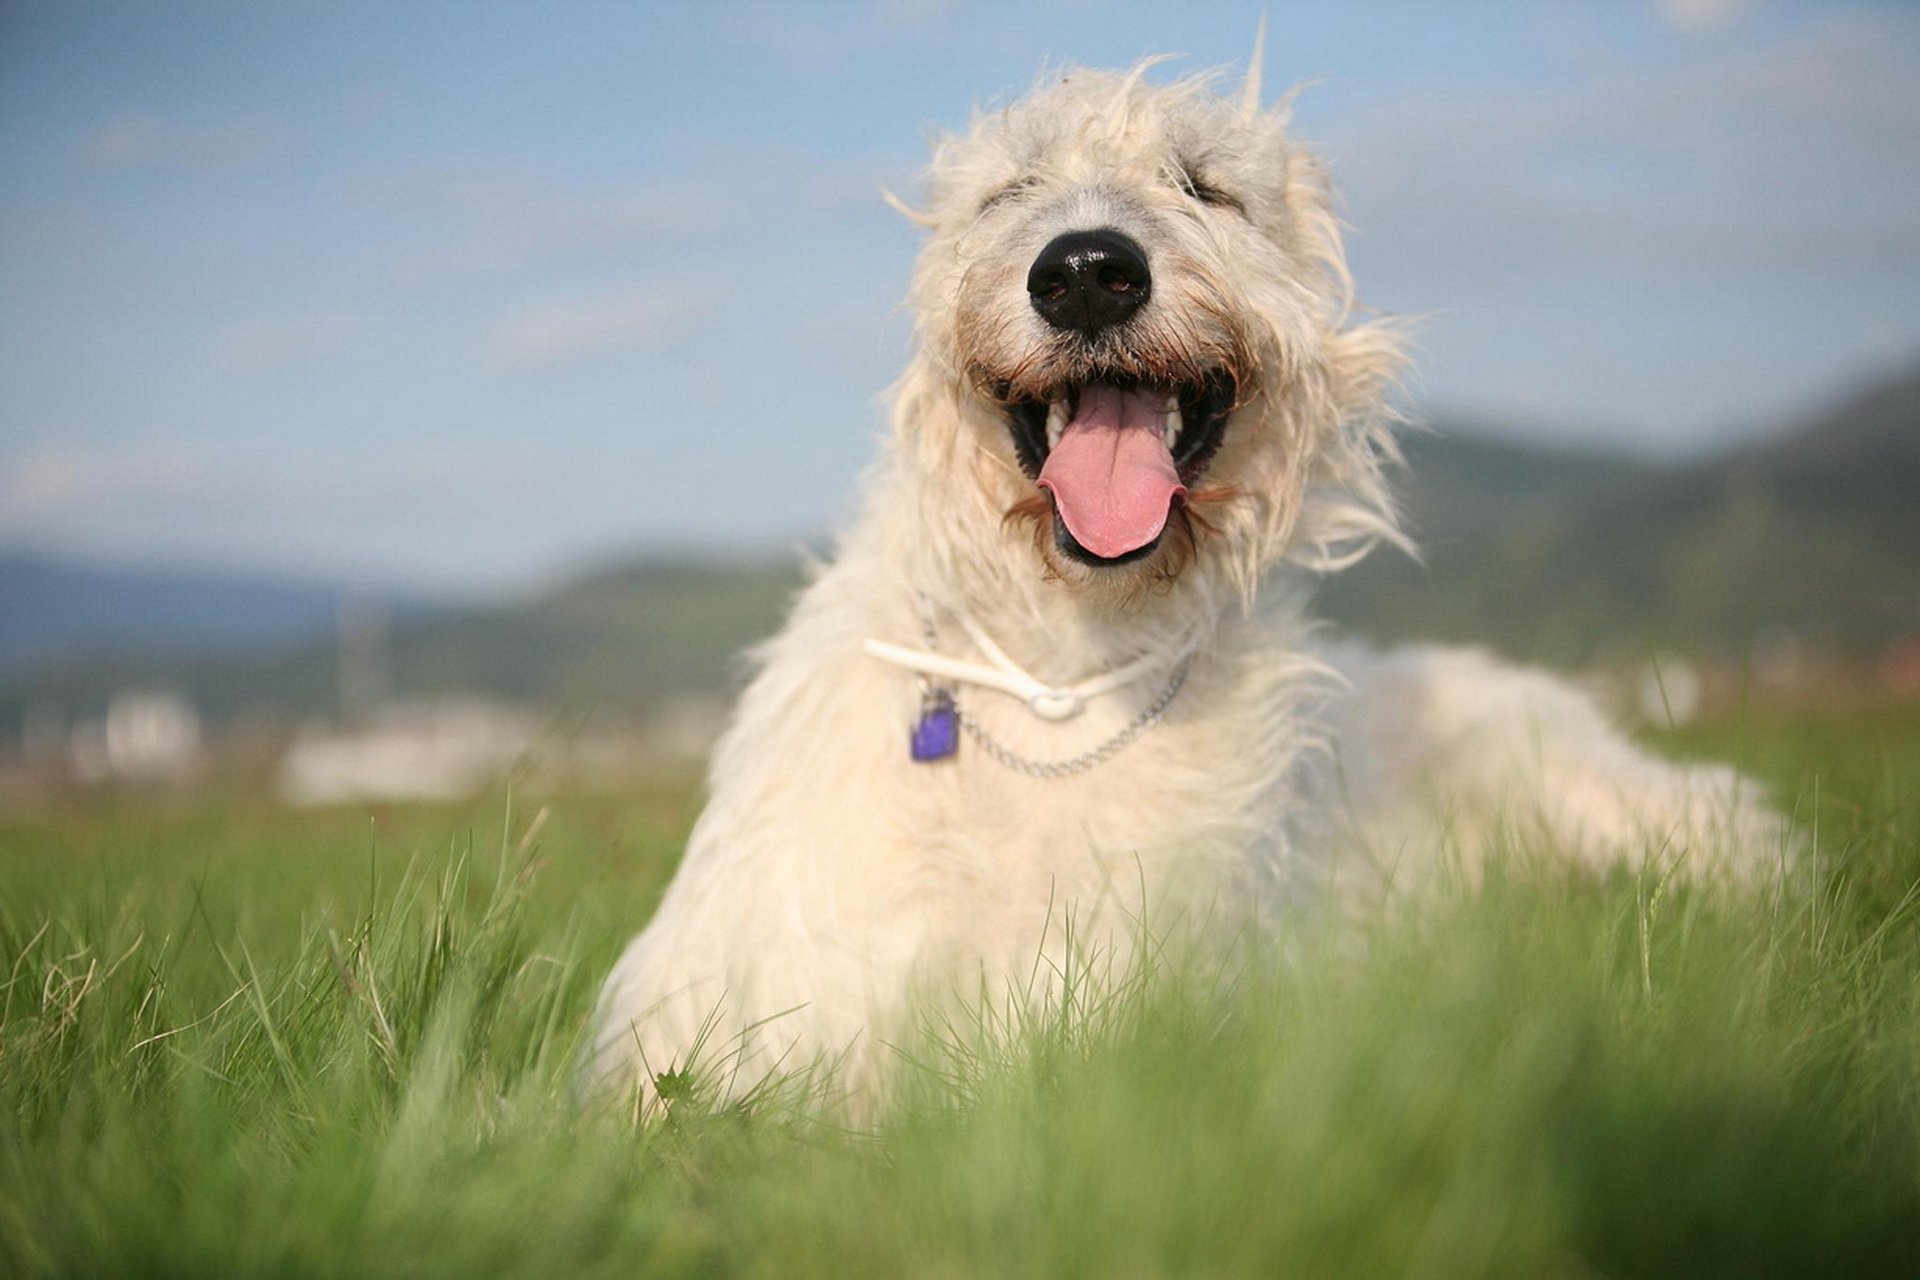 Irish Wolfhound of a white color